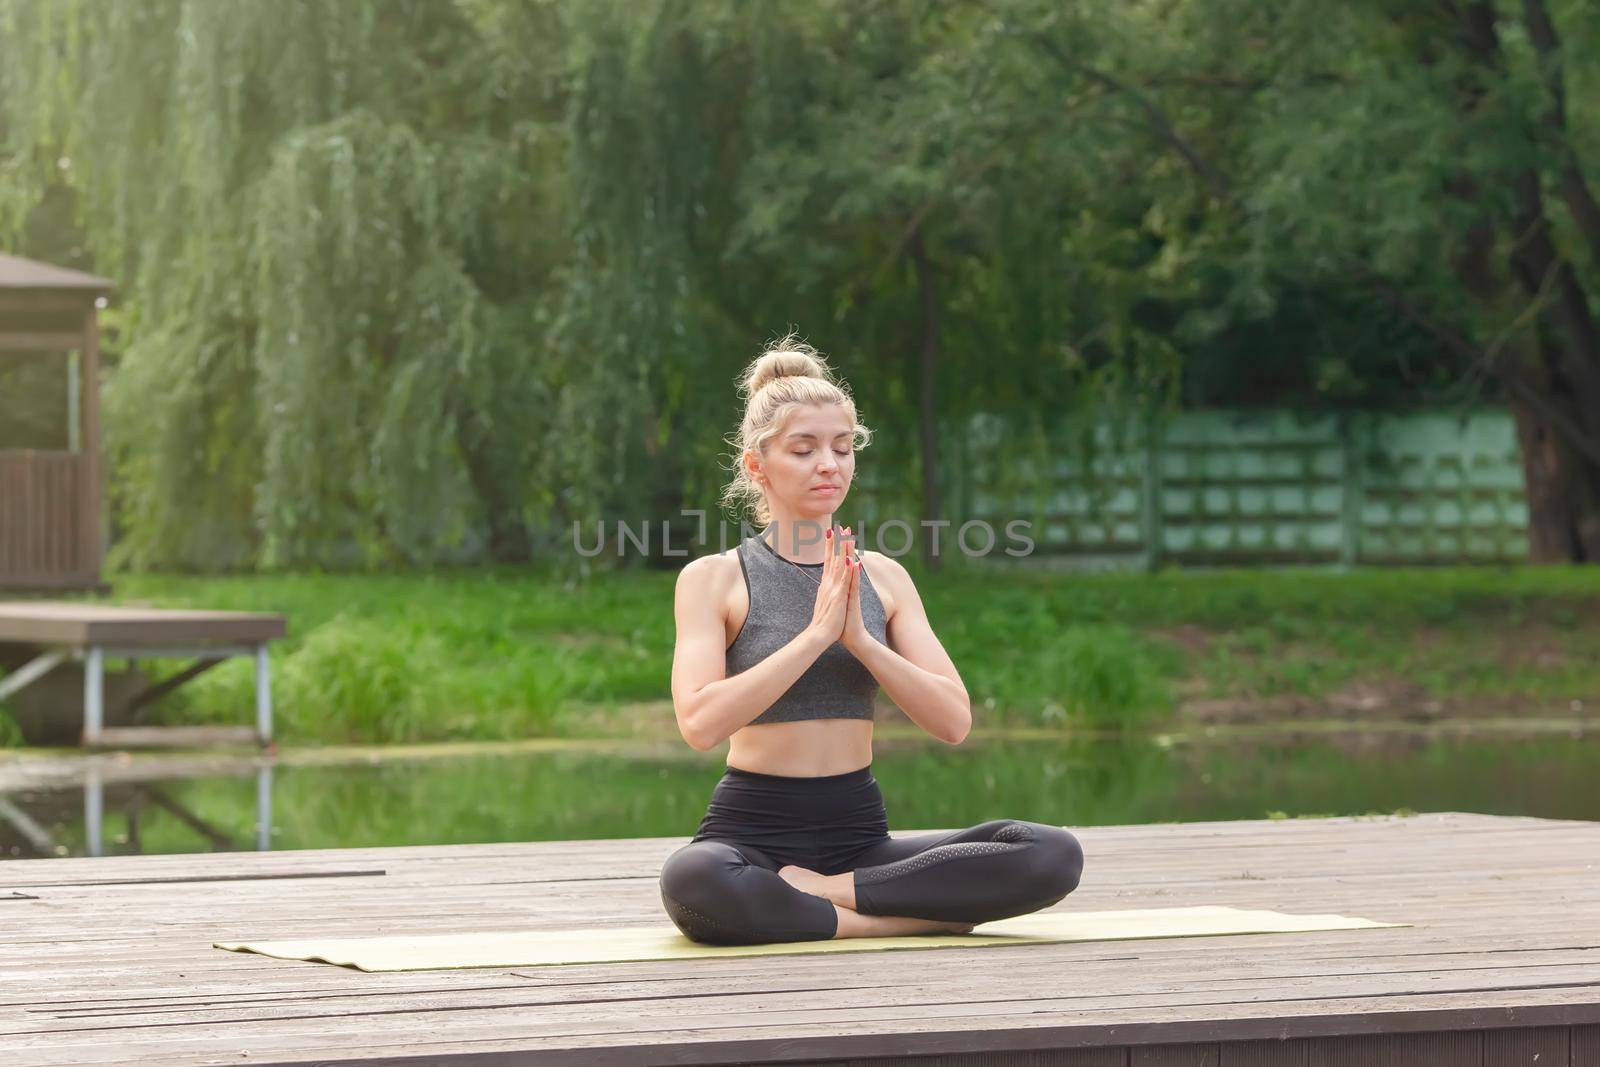 A beautiful woman in a gray top and leggings, sitting on a wooden platform by a pond in the park in summer, does yoga with her palms together, closing her eyes